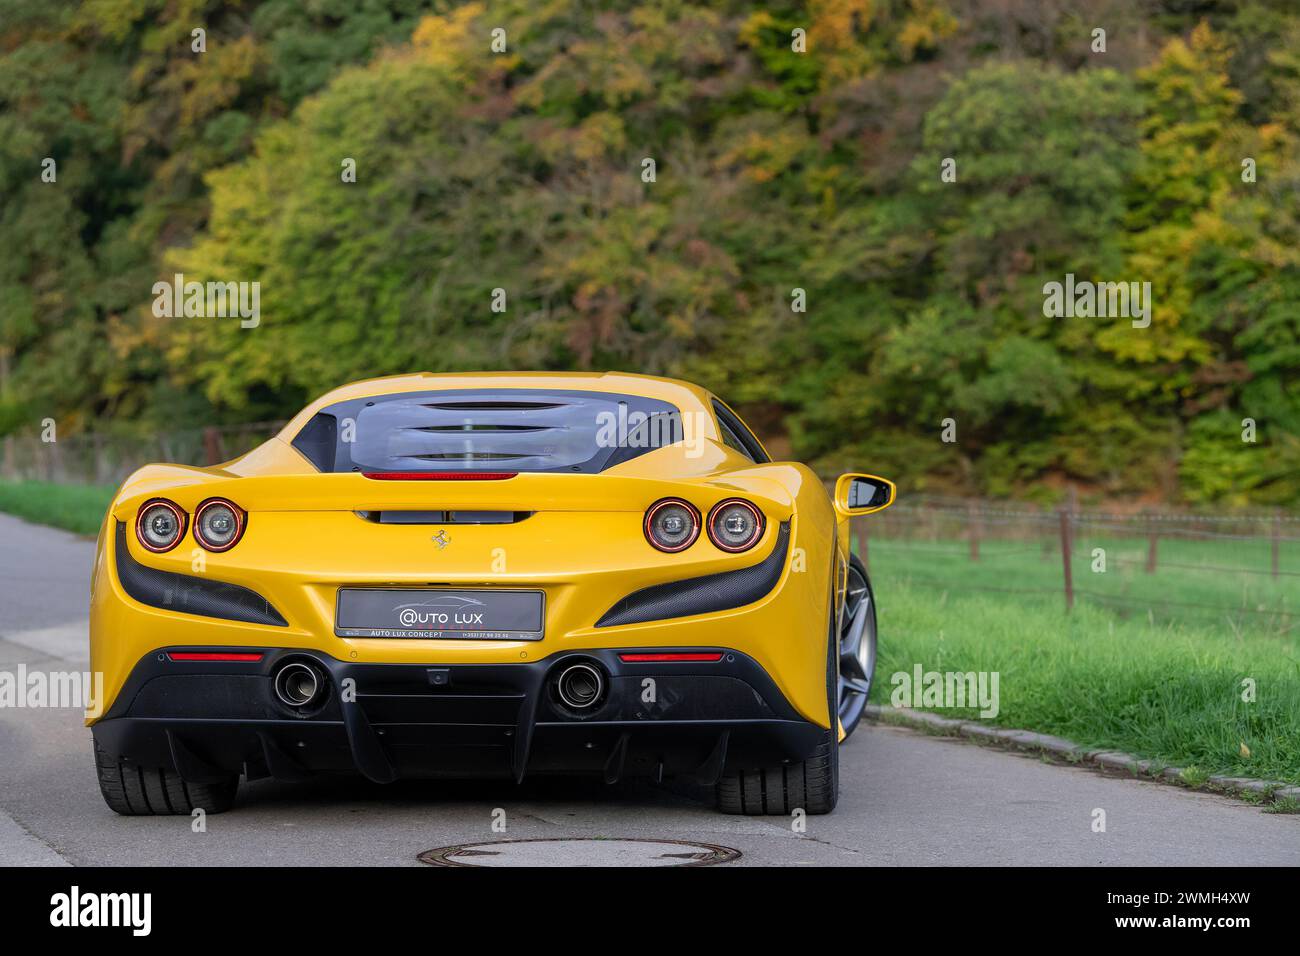 Luxembourg City, Luxembourg - Focus on a Giallo Triplo Strato Ferrari F8 Tributo parked in a street in the countryside. Stock Photo